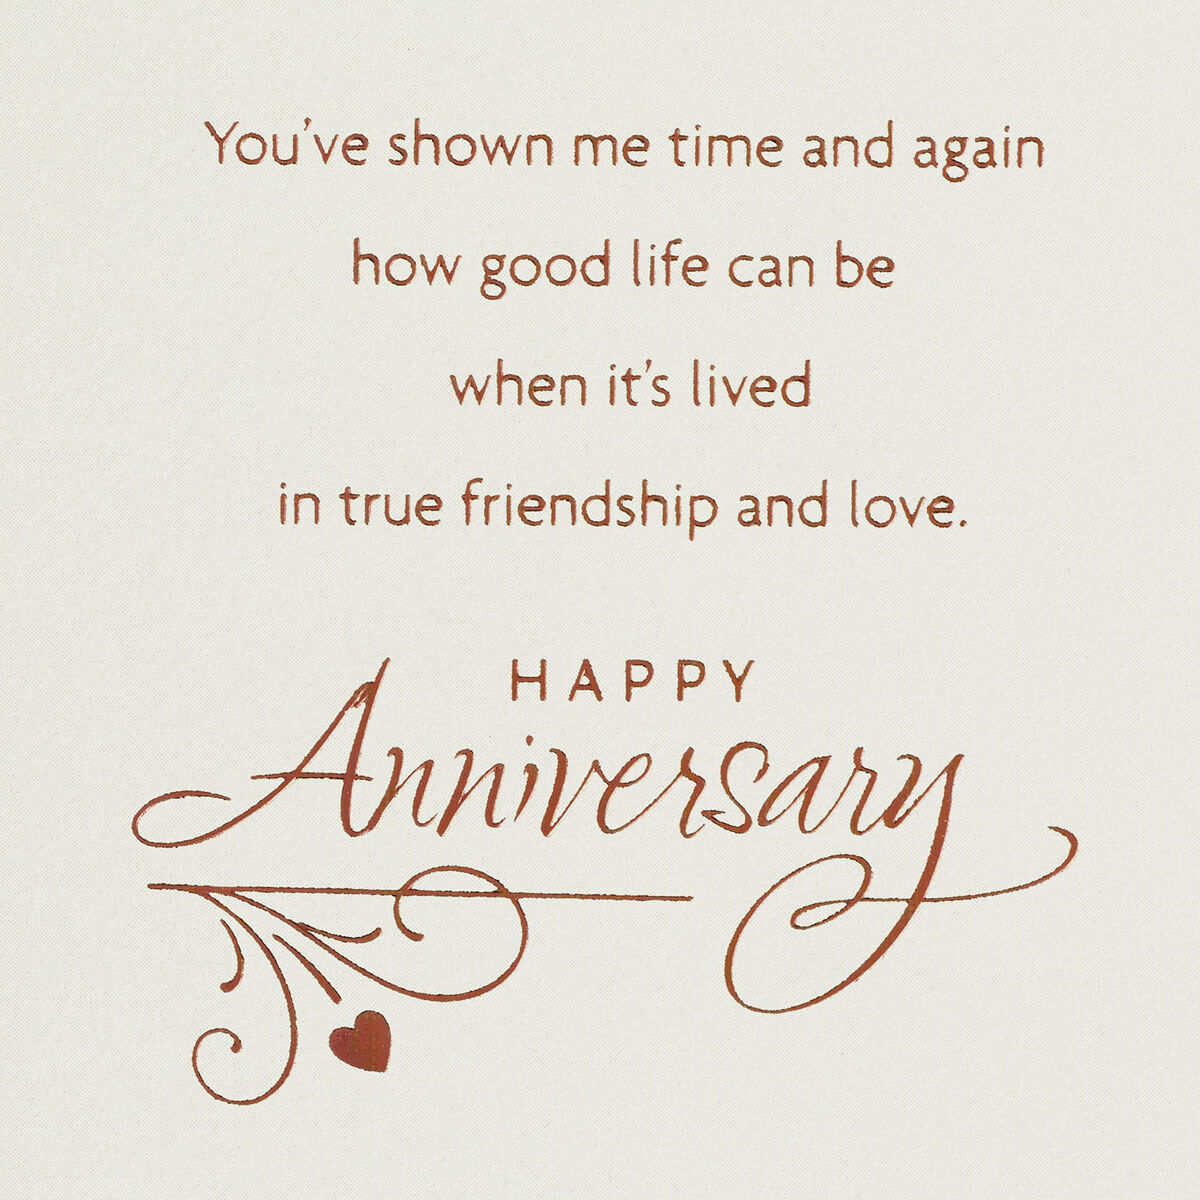 My Partner, My Friend Anniversary Card for Husband - Greeting Cards ...